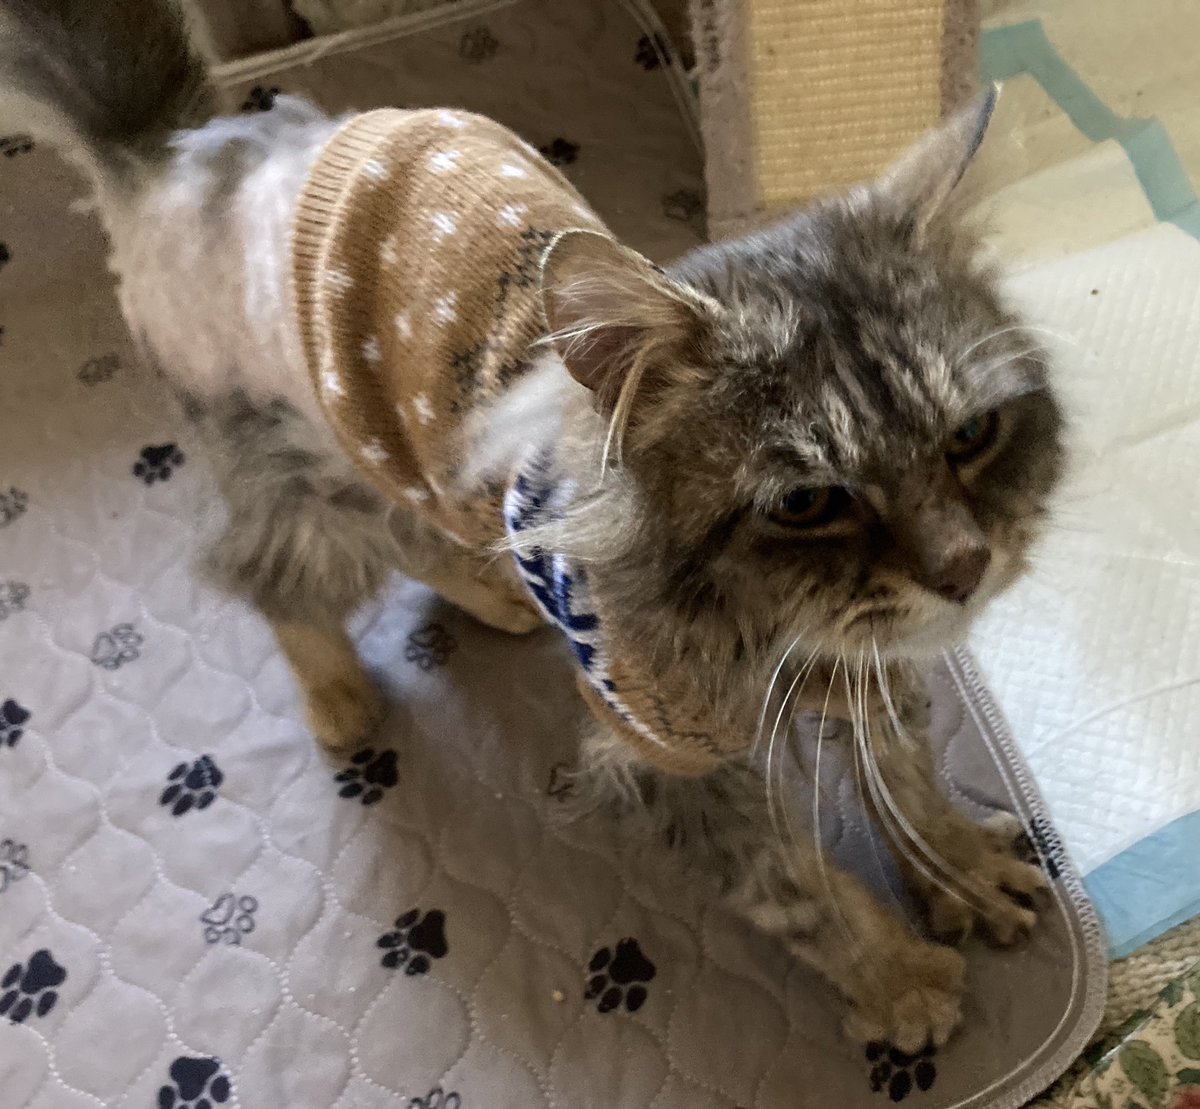 Louis was found as a stray in #Latimer. He was in a terrible state & had to have a lot of his fur shaved off, which is why he's wearing this natty little jumper. One of our dedicated volunteers looked after him & he now has been rehomed. Happy ending! #CatsOfTwitter #CatsOfX